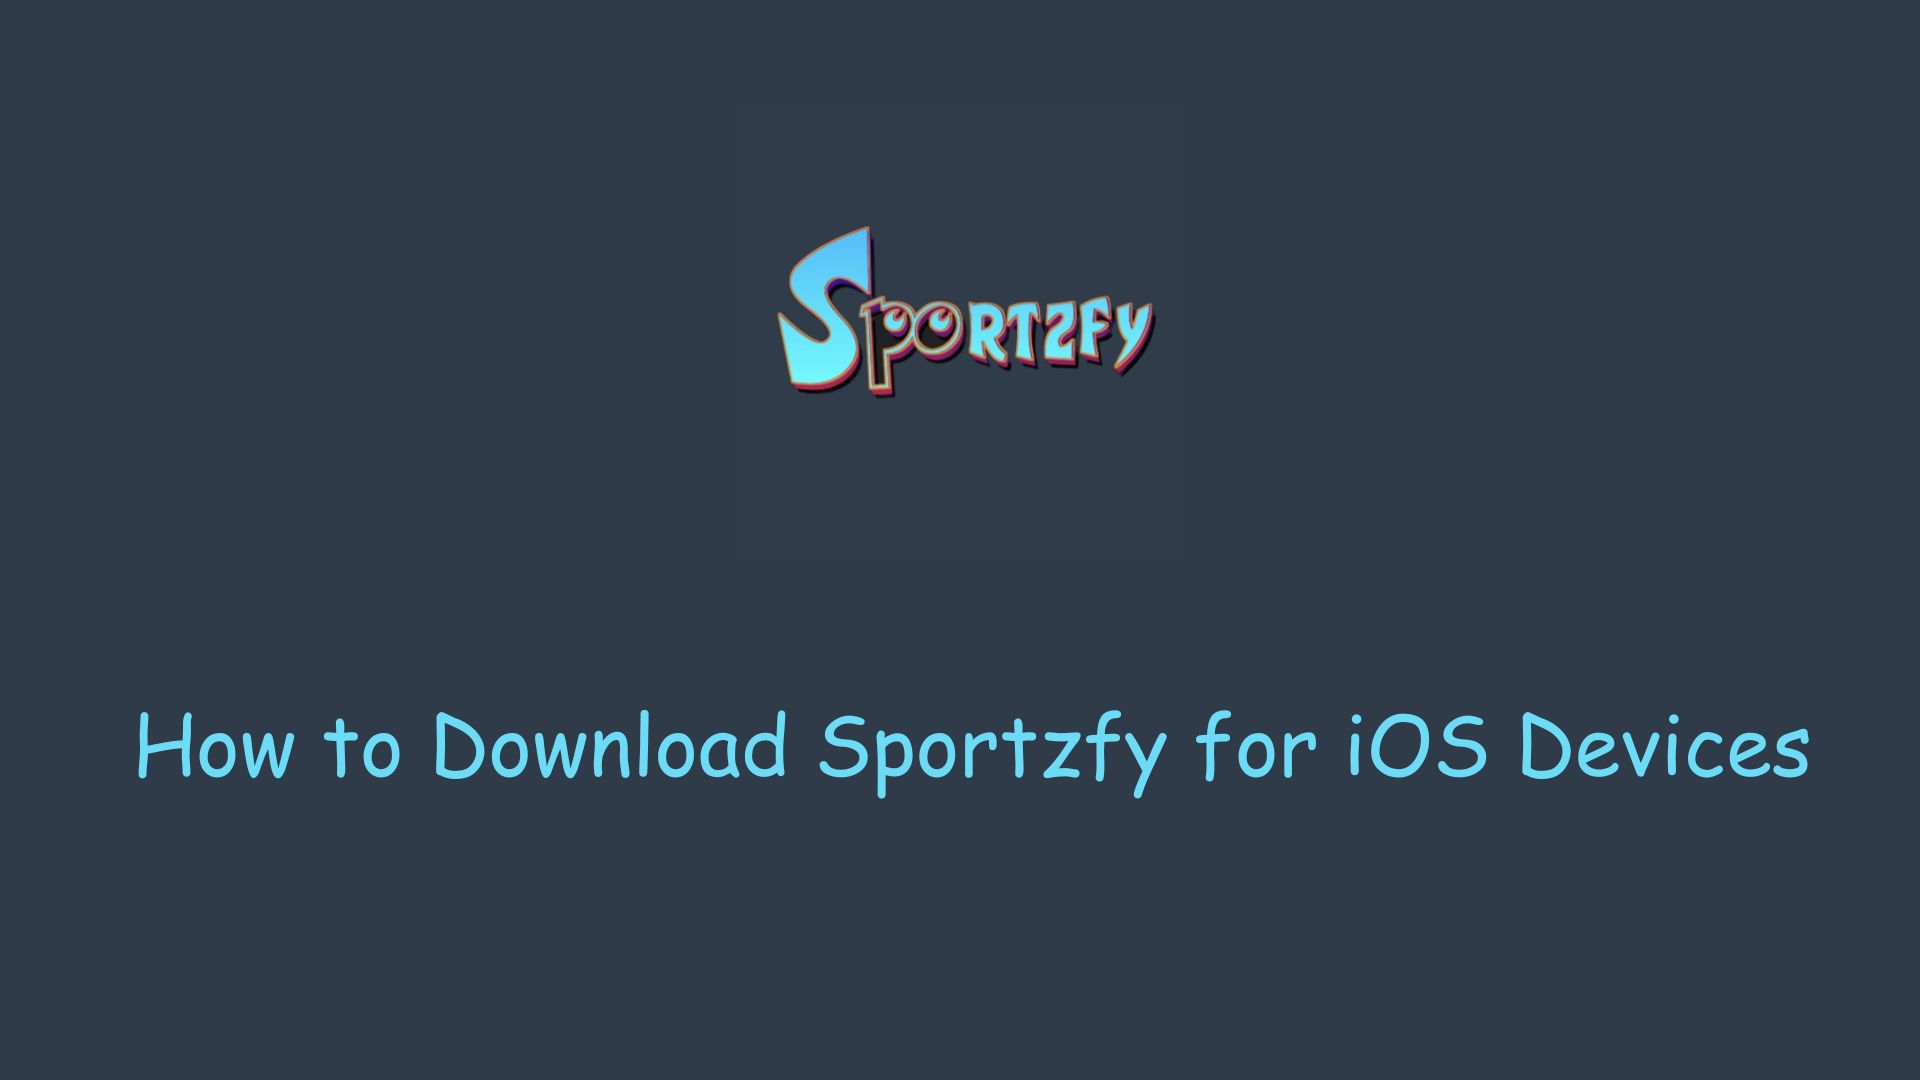 How to Download Sportzfy for iOS Devices